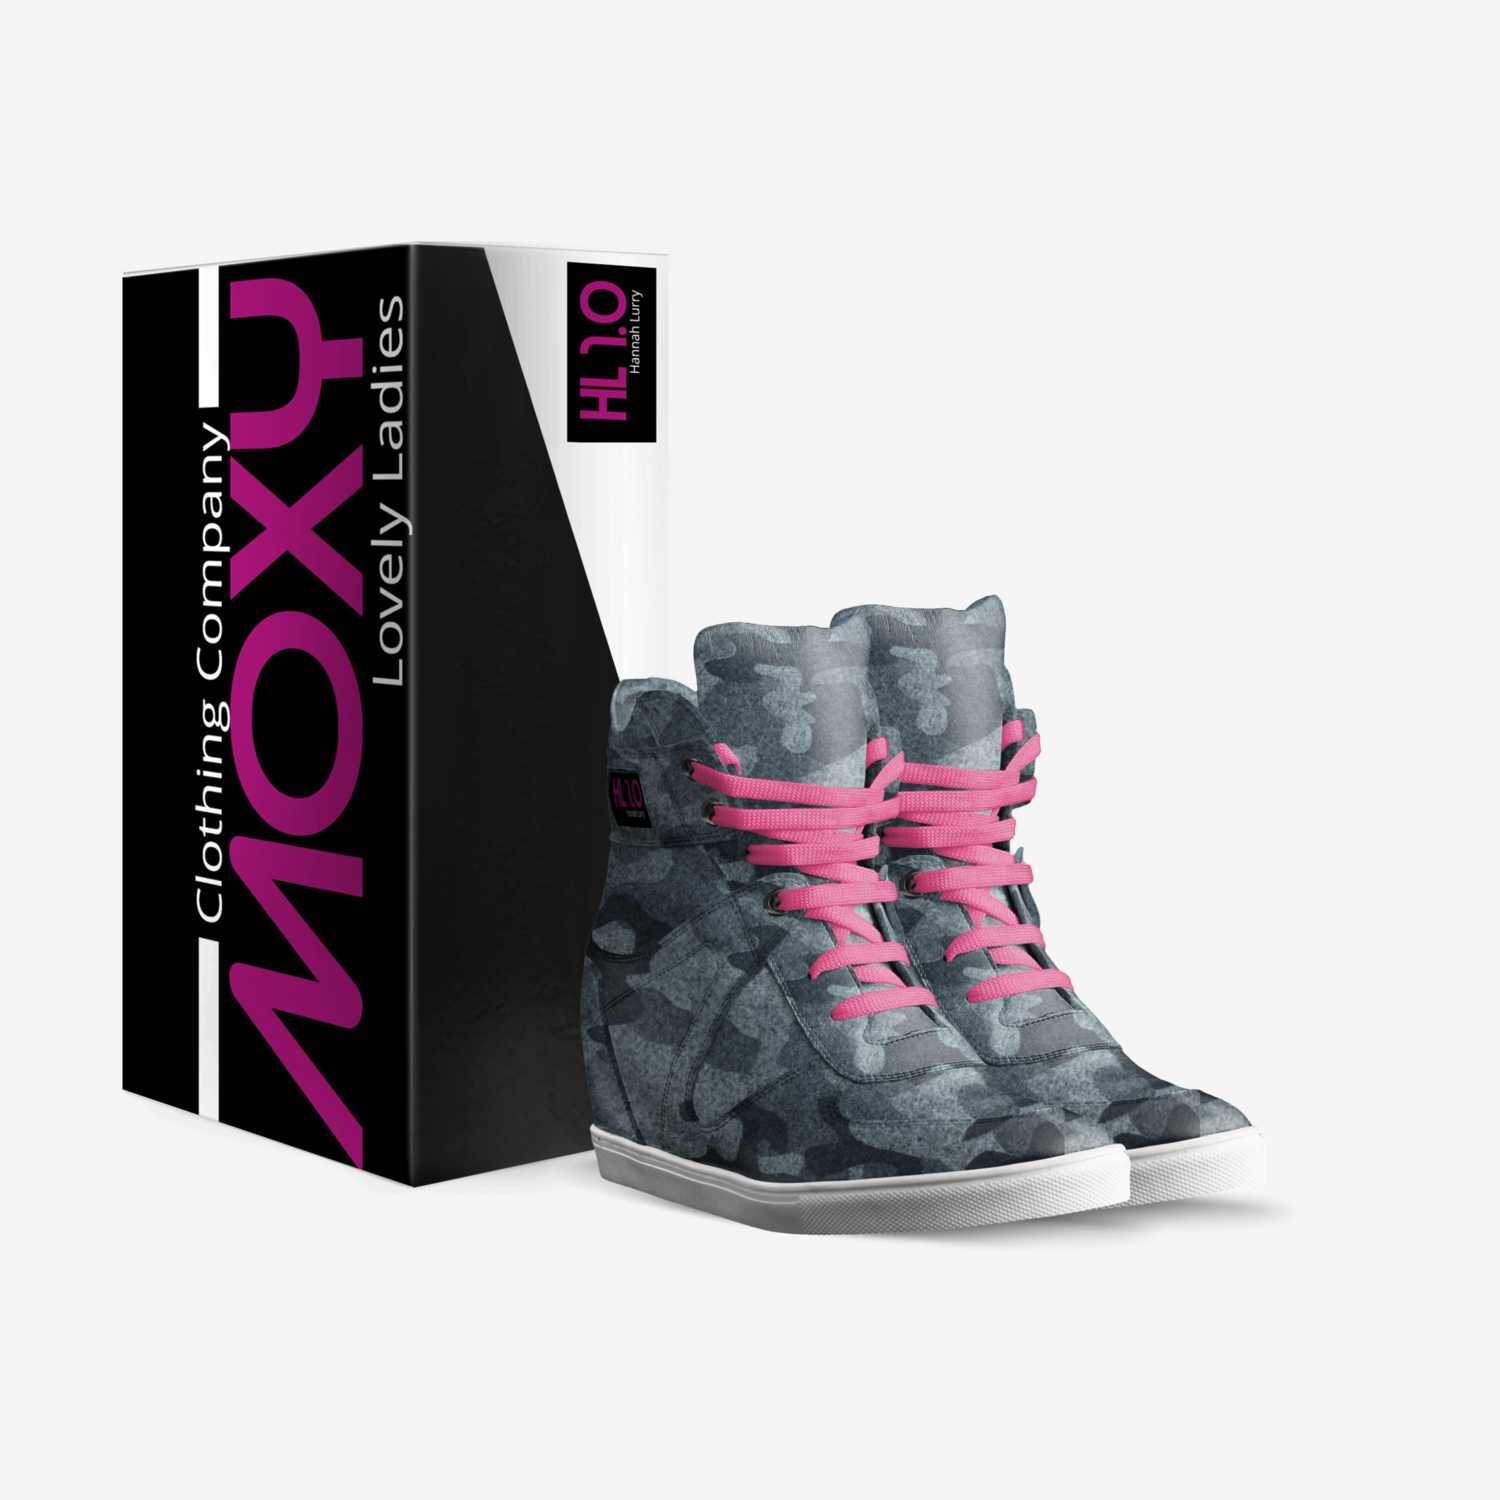 HL 1.0 custom made in Italy shoes by Moxy Clothing Co. | Box view